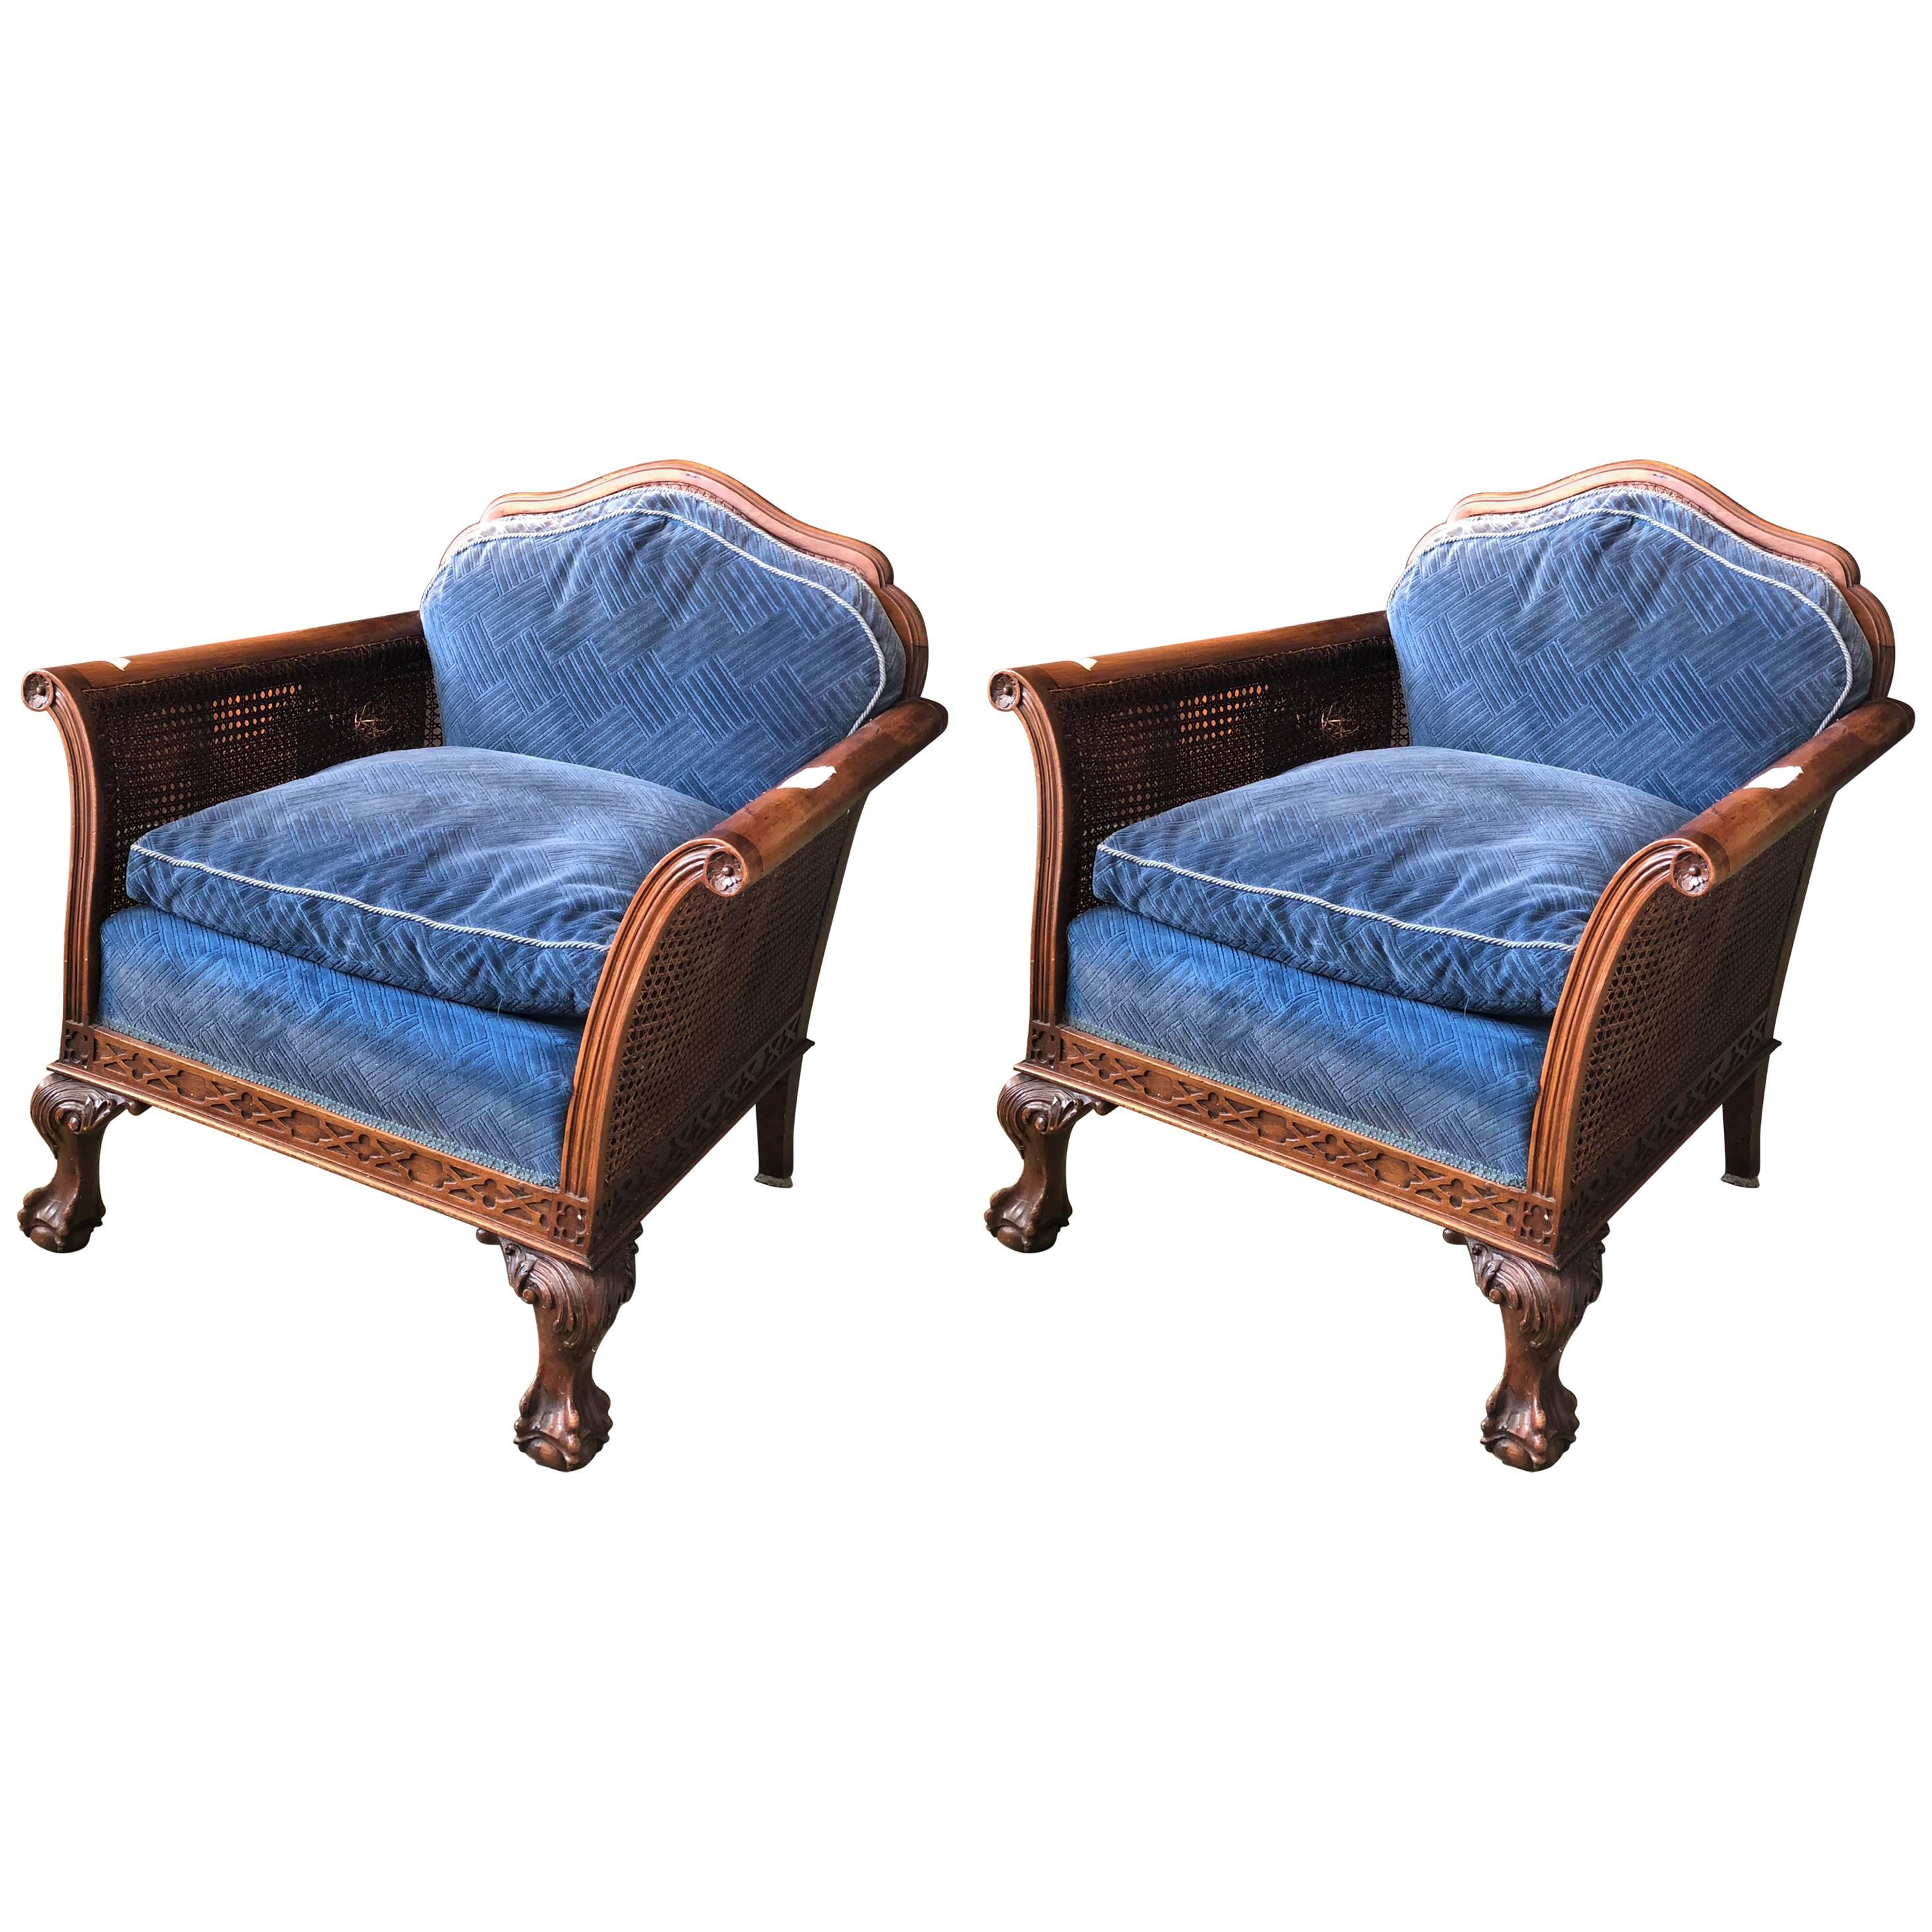 Two Blue Carved Neoclassical Wood Cane Armchairs